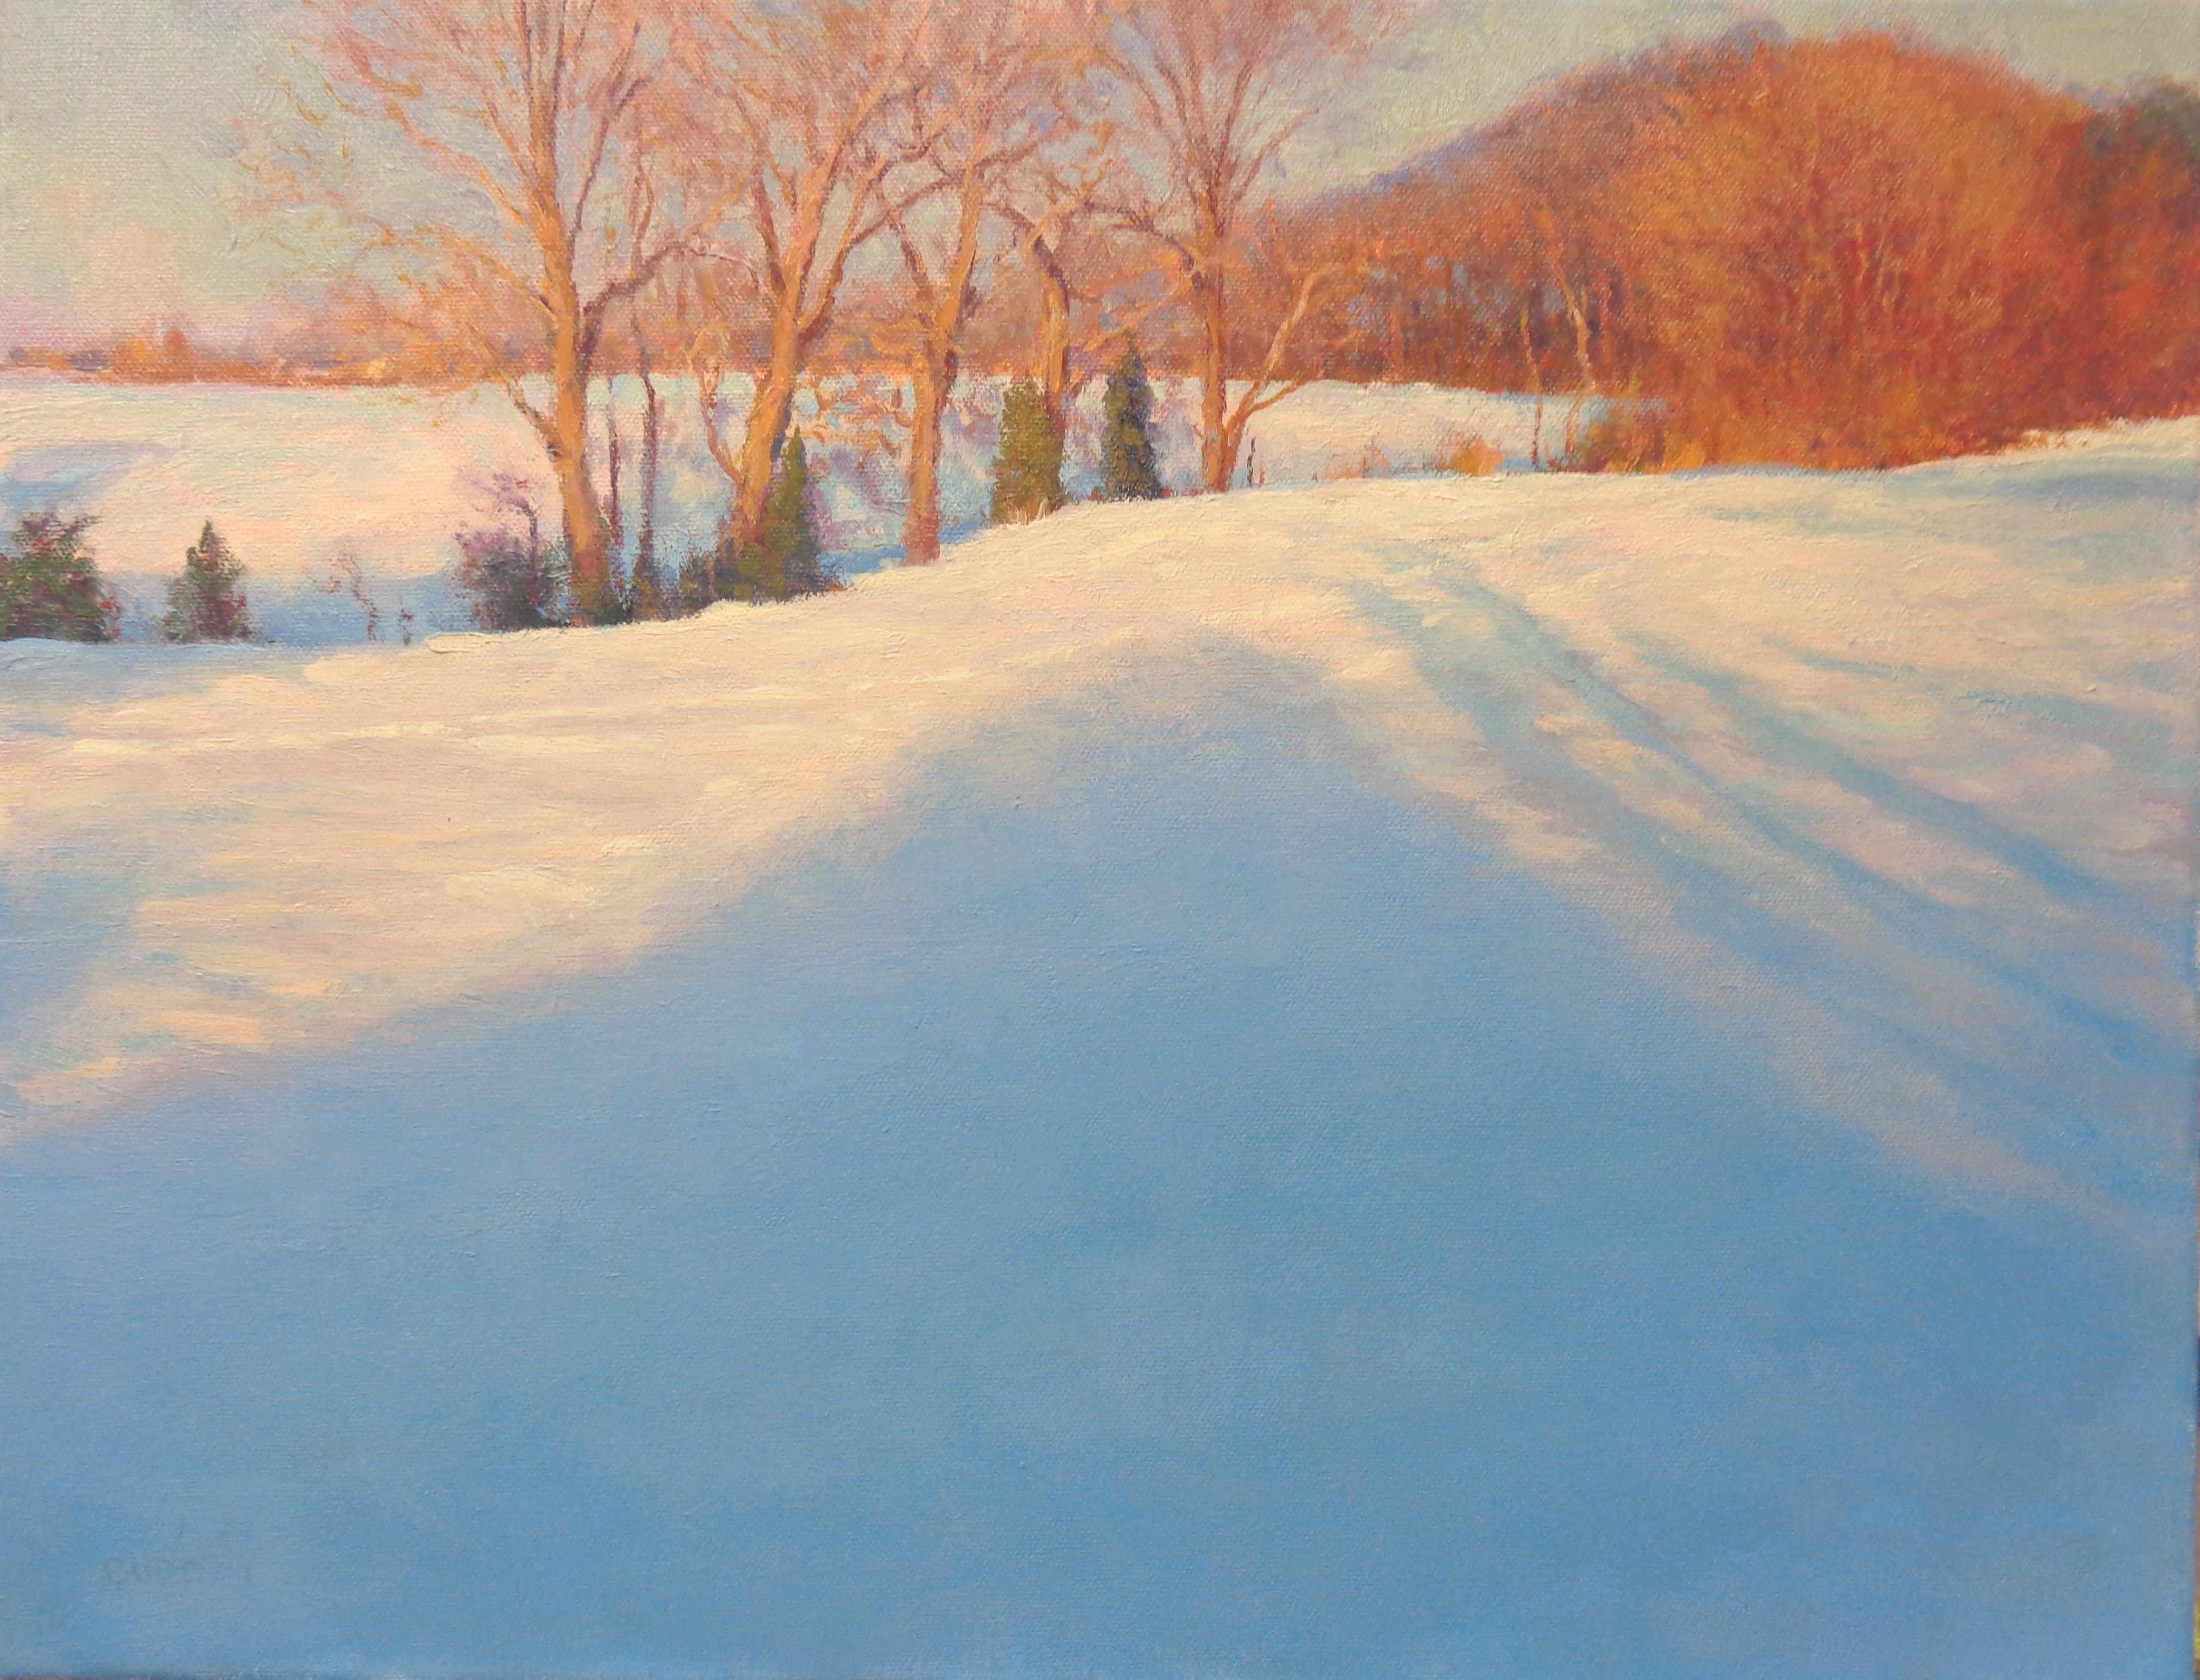 paintings of snowy landscapes